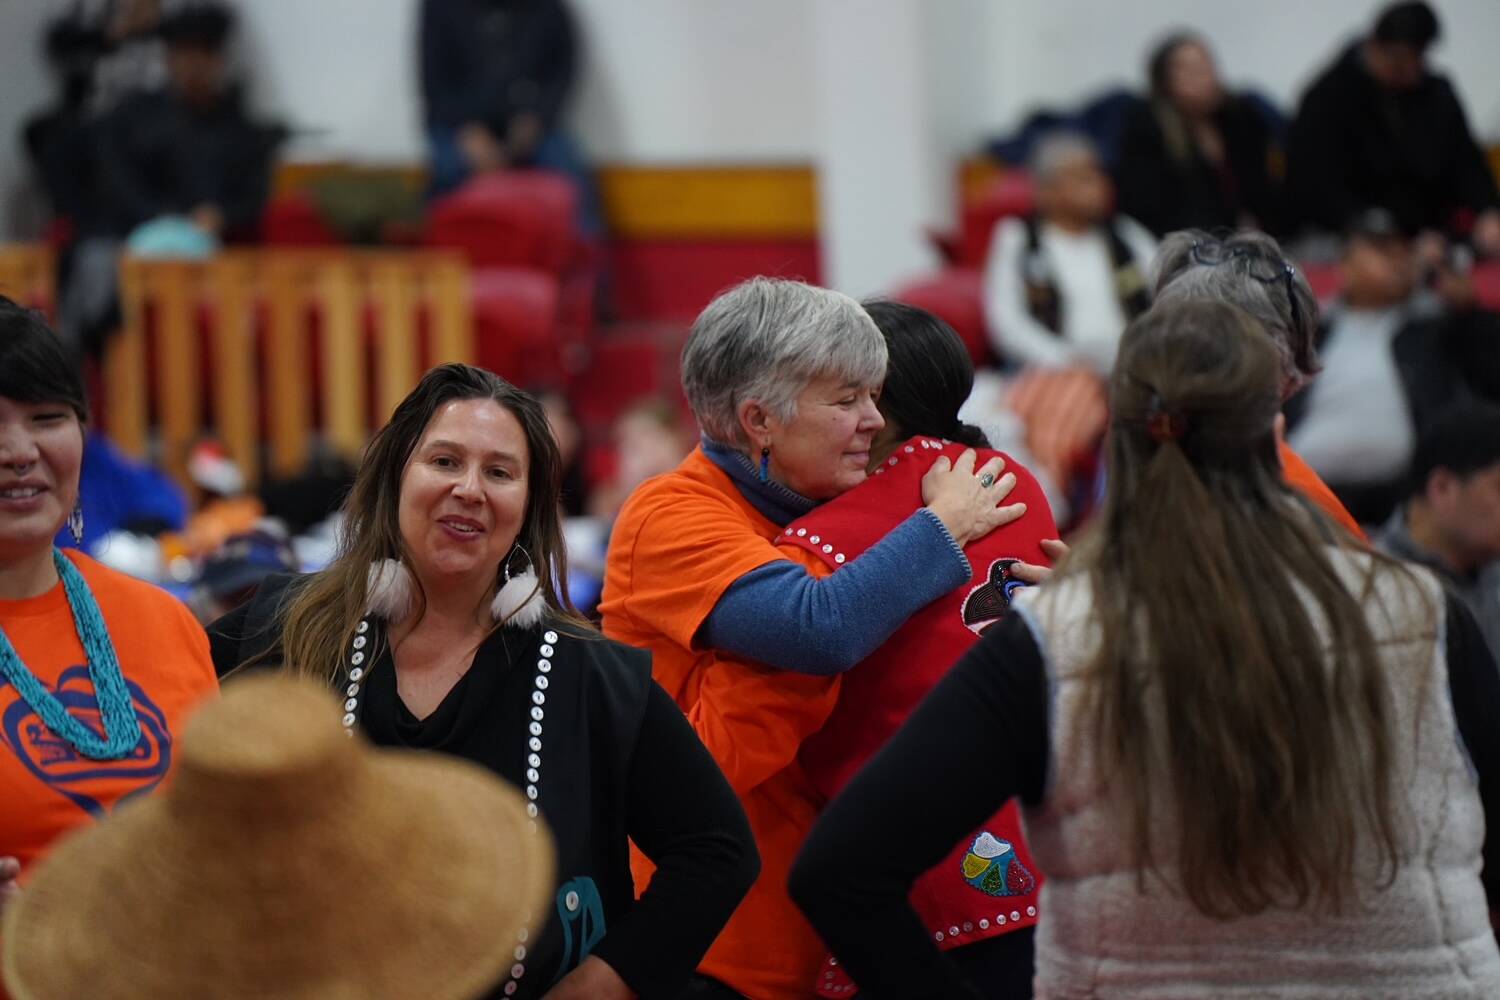 Cathy Walling of the Alaska Quaker Friends hugs Jamiann S’eiltin Hasselquist in Kake, while Ati Nasiah of the non-profit Haa Tóoch Lichéesh smiles in the foreground on Jan. 19. (Photo by Shaelene Grace Moler)